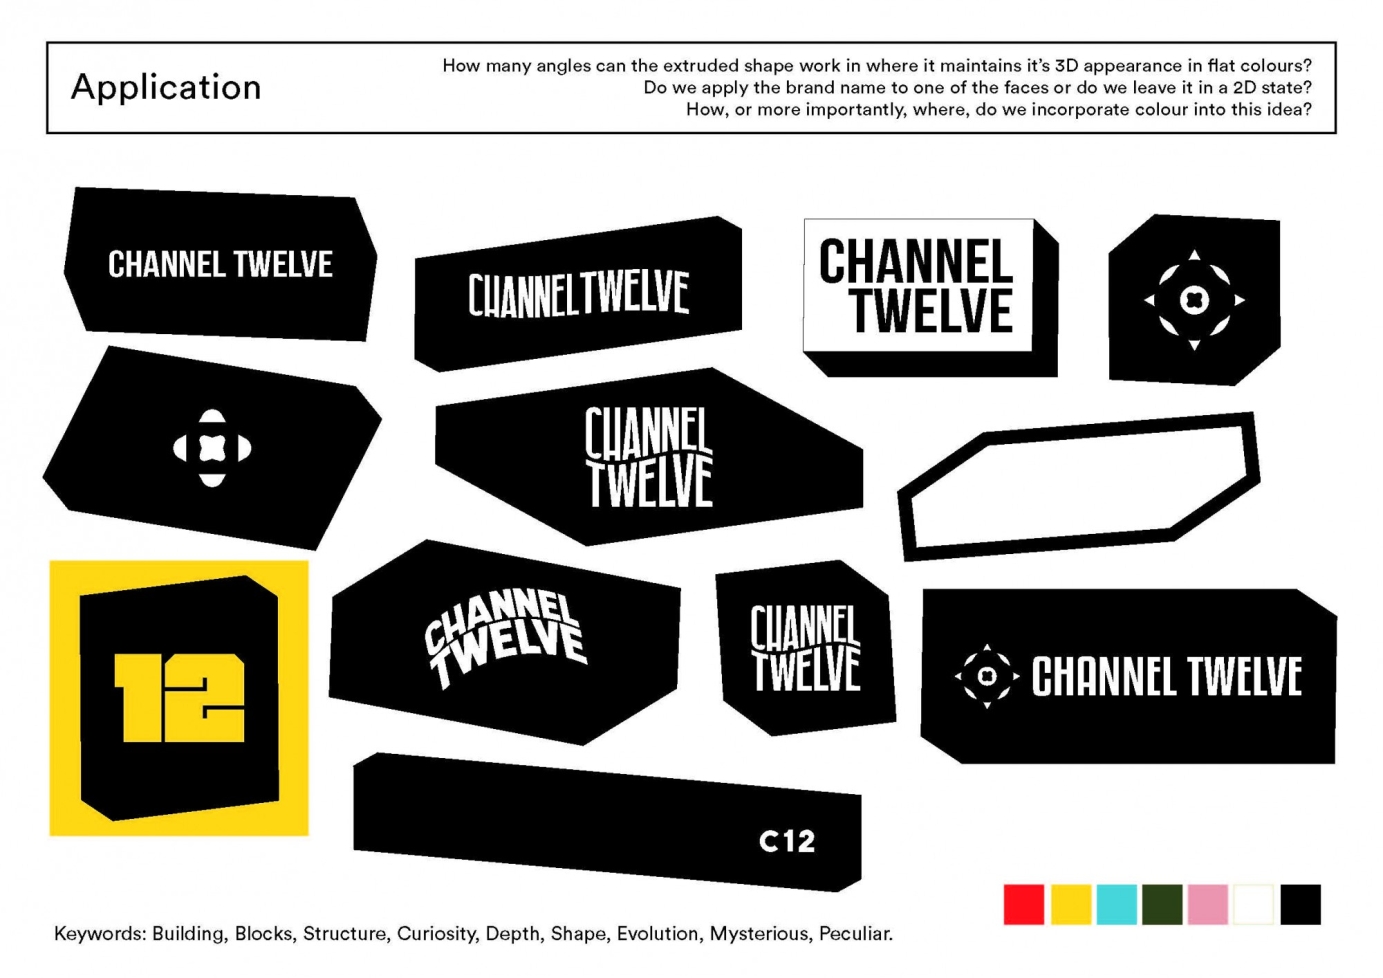 Channel Twelve - For People Fuelled By Curiosity.